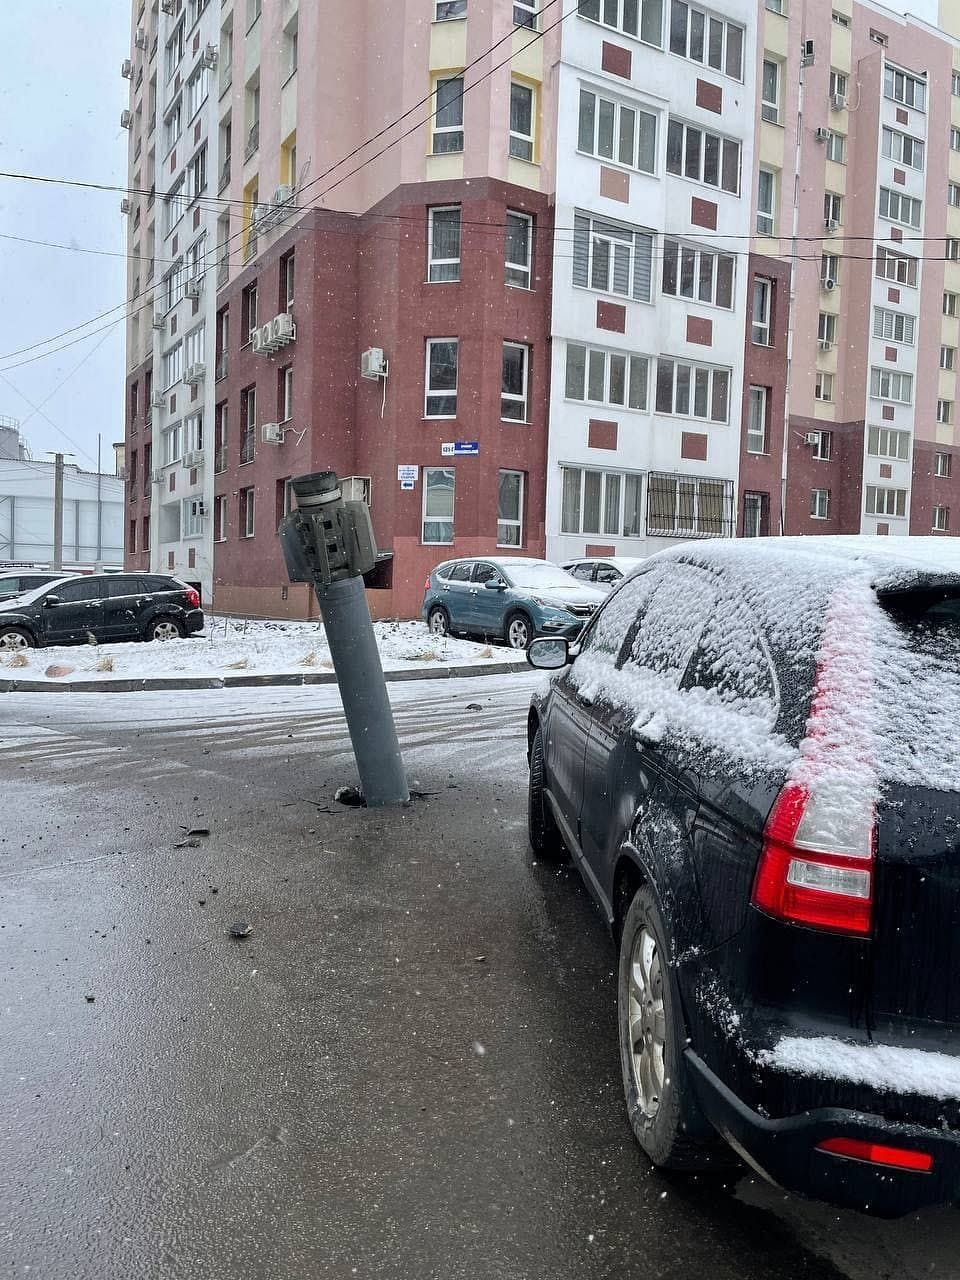 A missile that failed to explode lodged in a parking lot in Kharkiv | Ishita Choudhury | By special arrangement